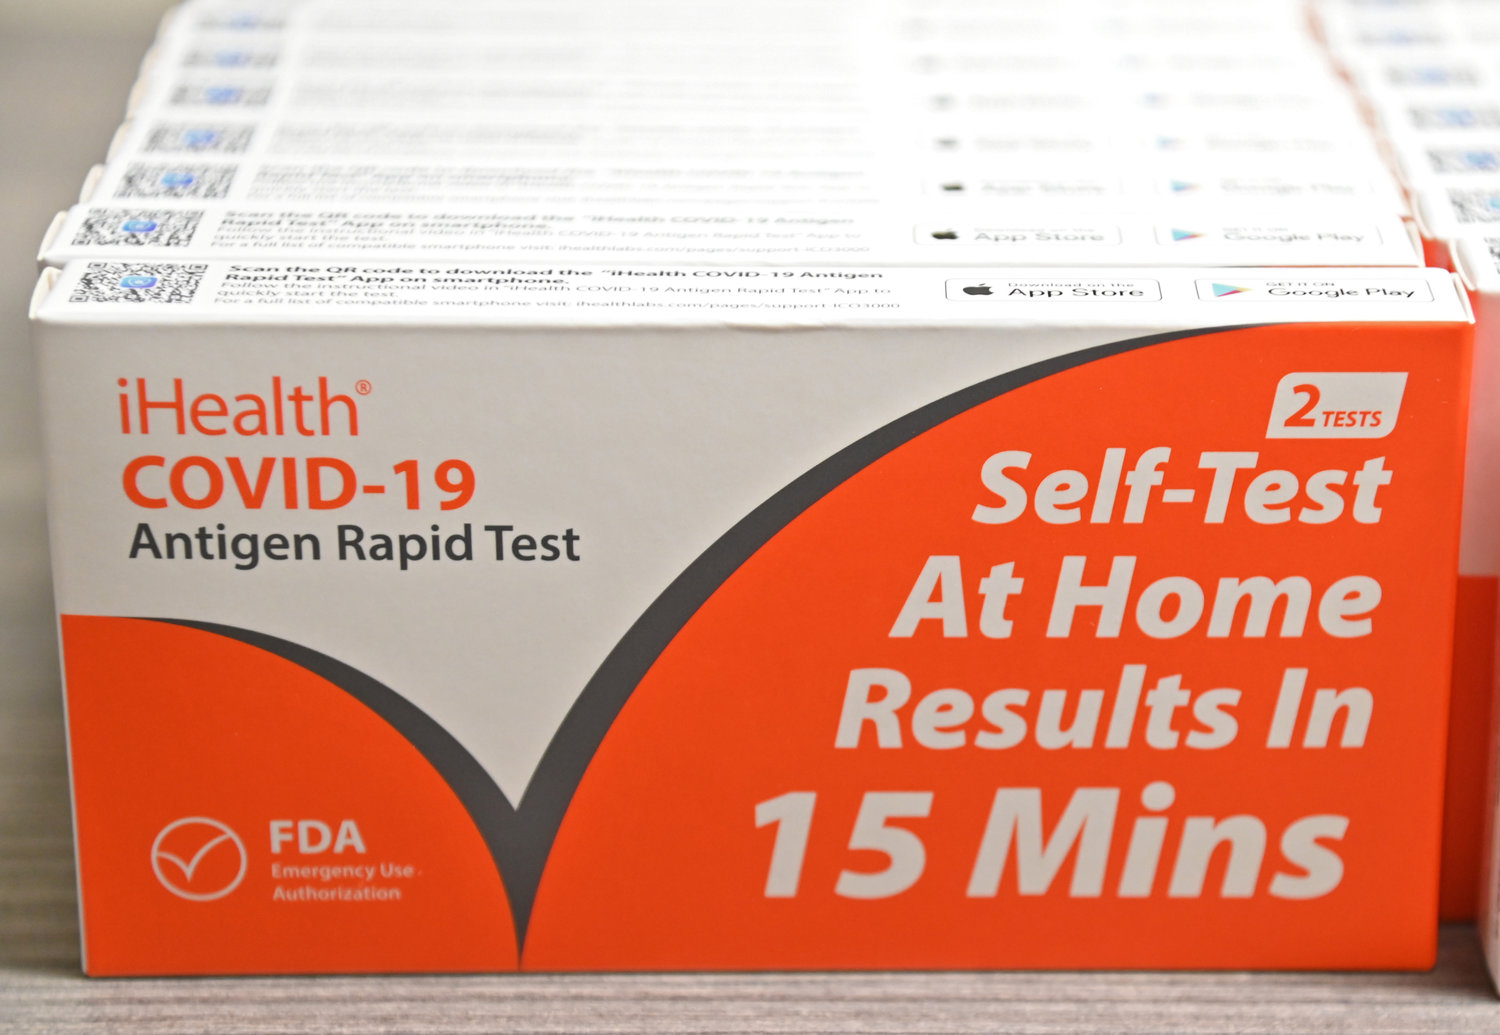 RAPID TEST — The home COVID-19 rapid test that is being handed out at the Rome City School District Offices.